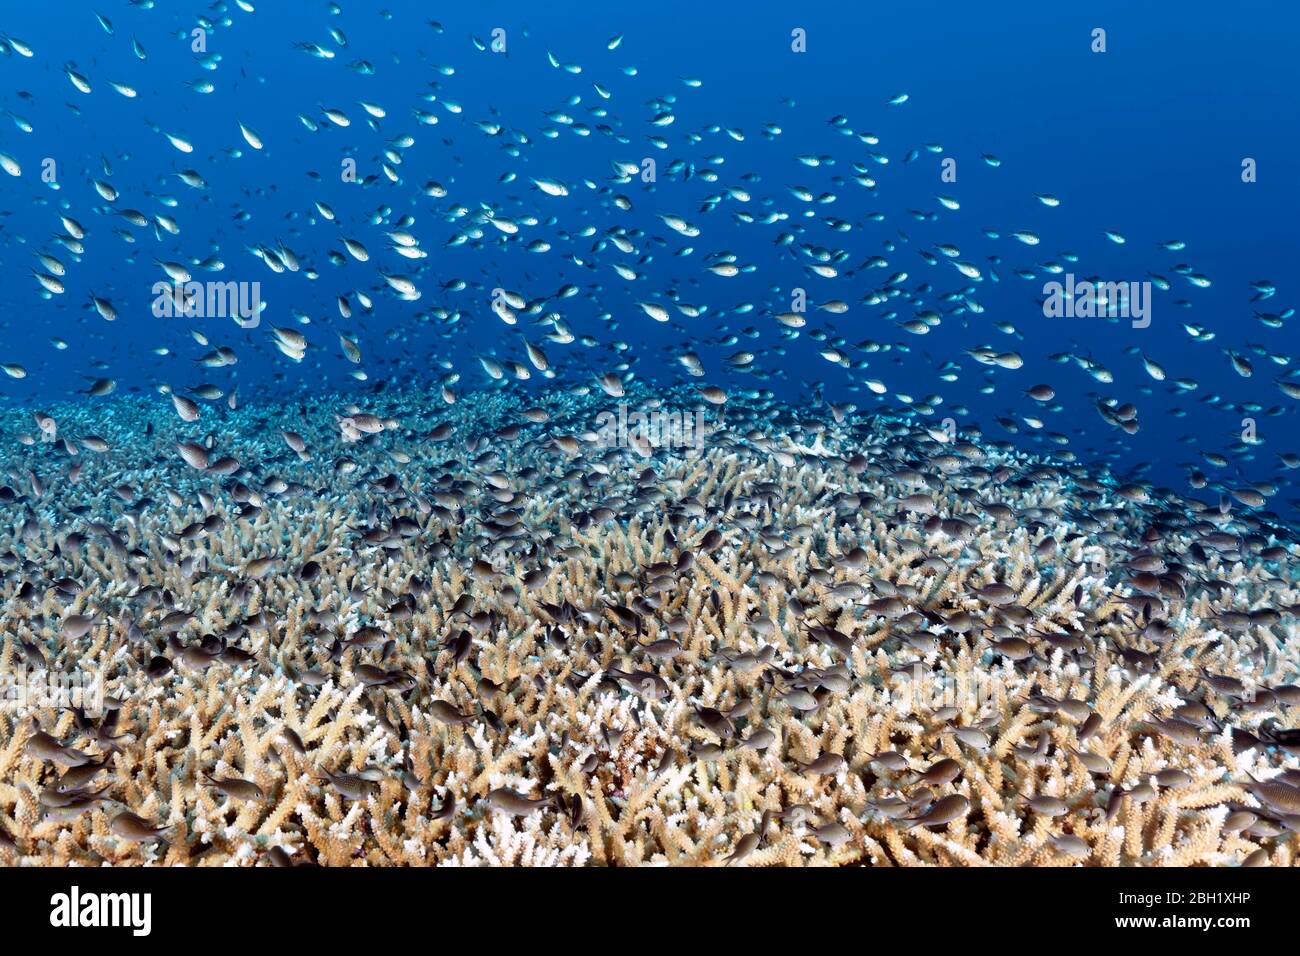 Swarm of damselfish (Chromis sp.) swimming densely packed over Acropora hard corals (Acropora sp.), Pacific, Sulu Sea, Tubbataha Reef National Marine Stock Photo